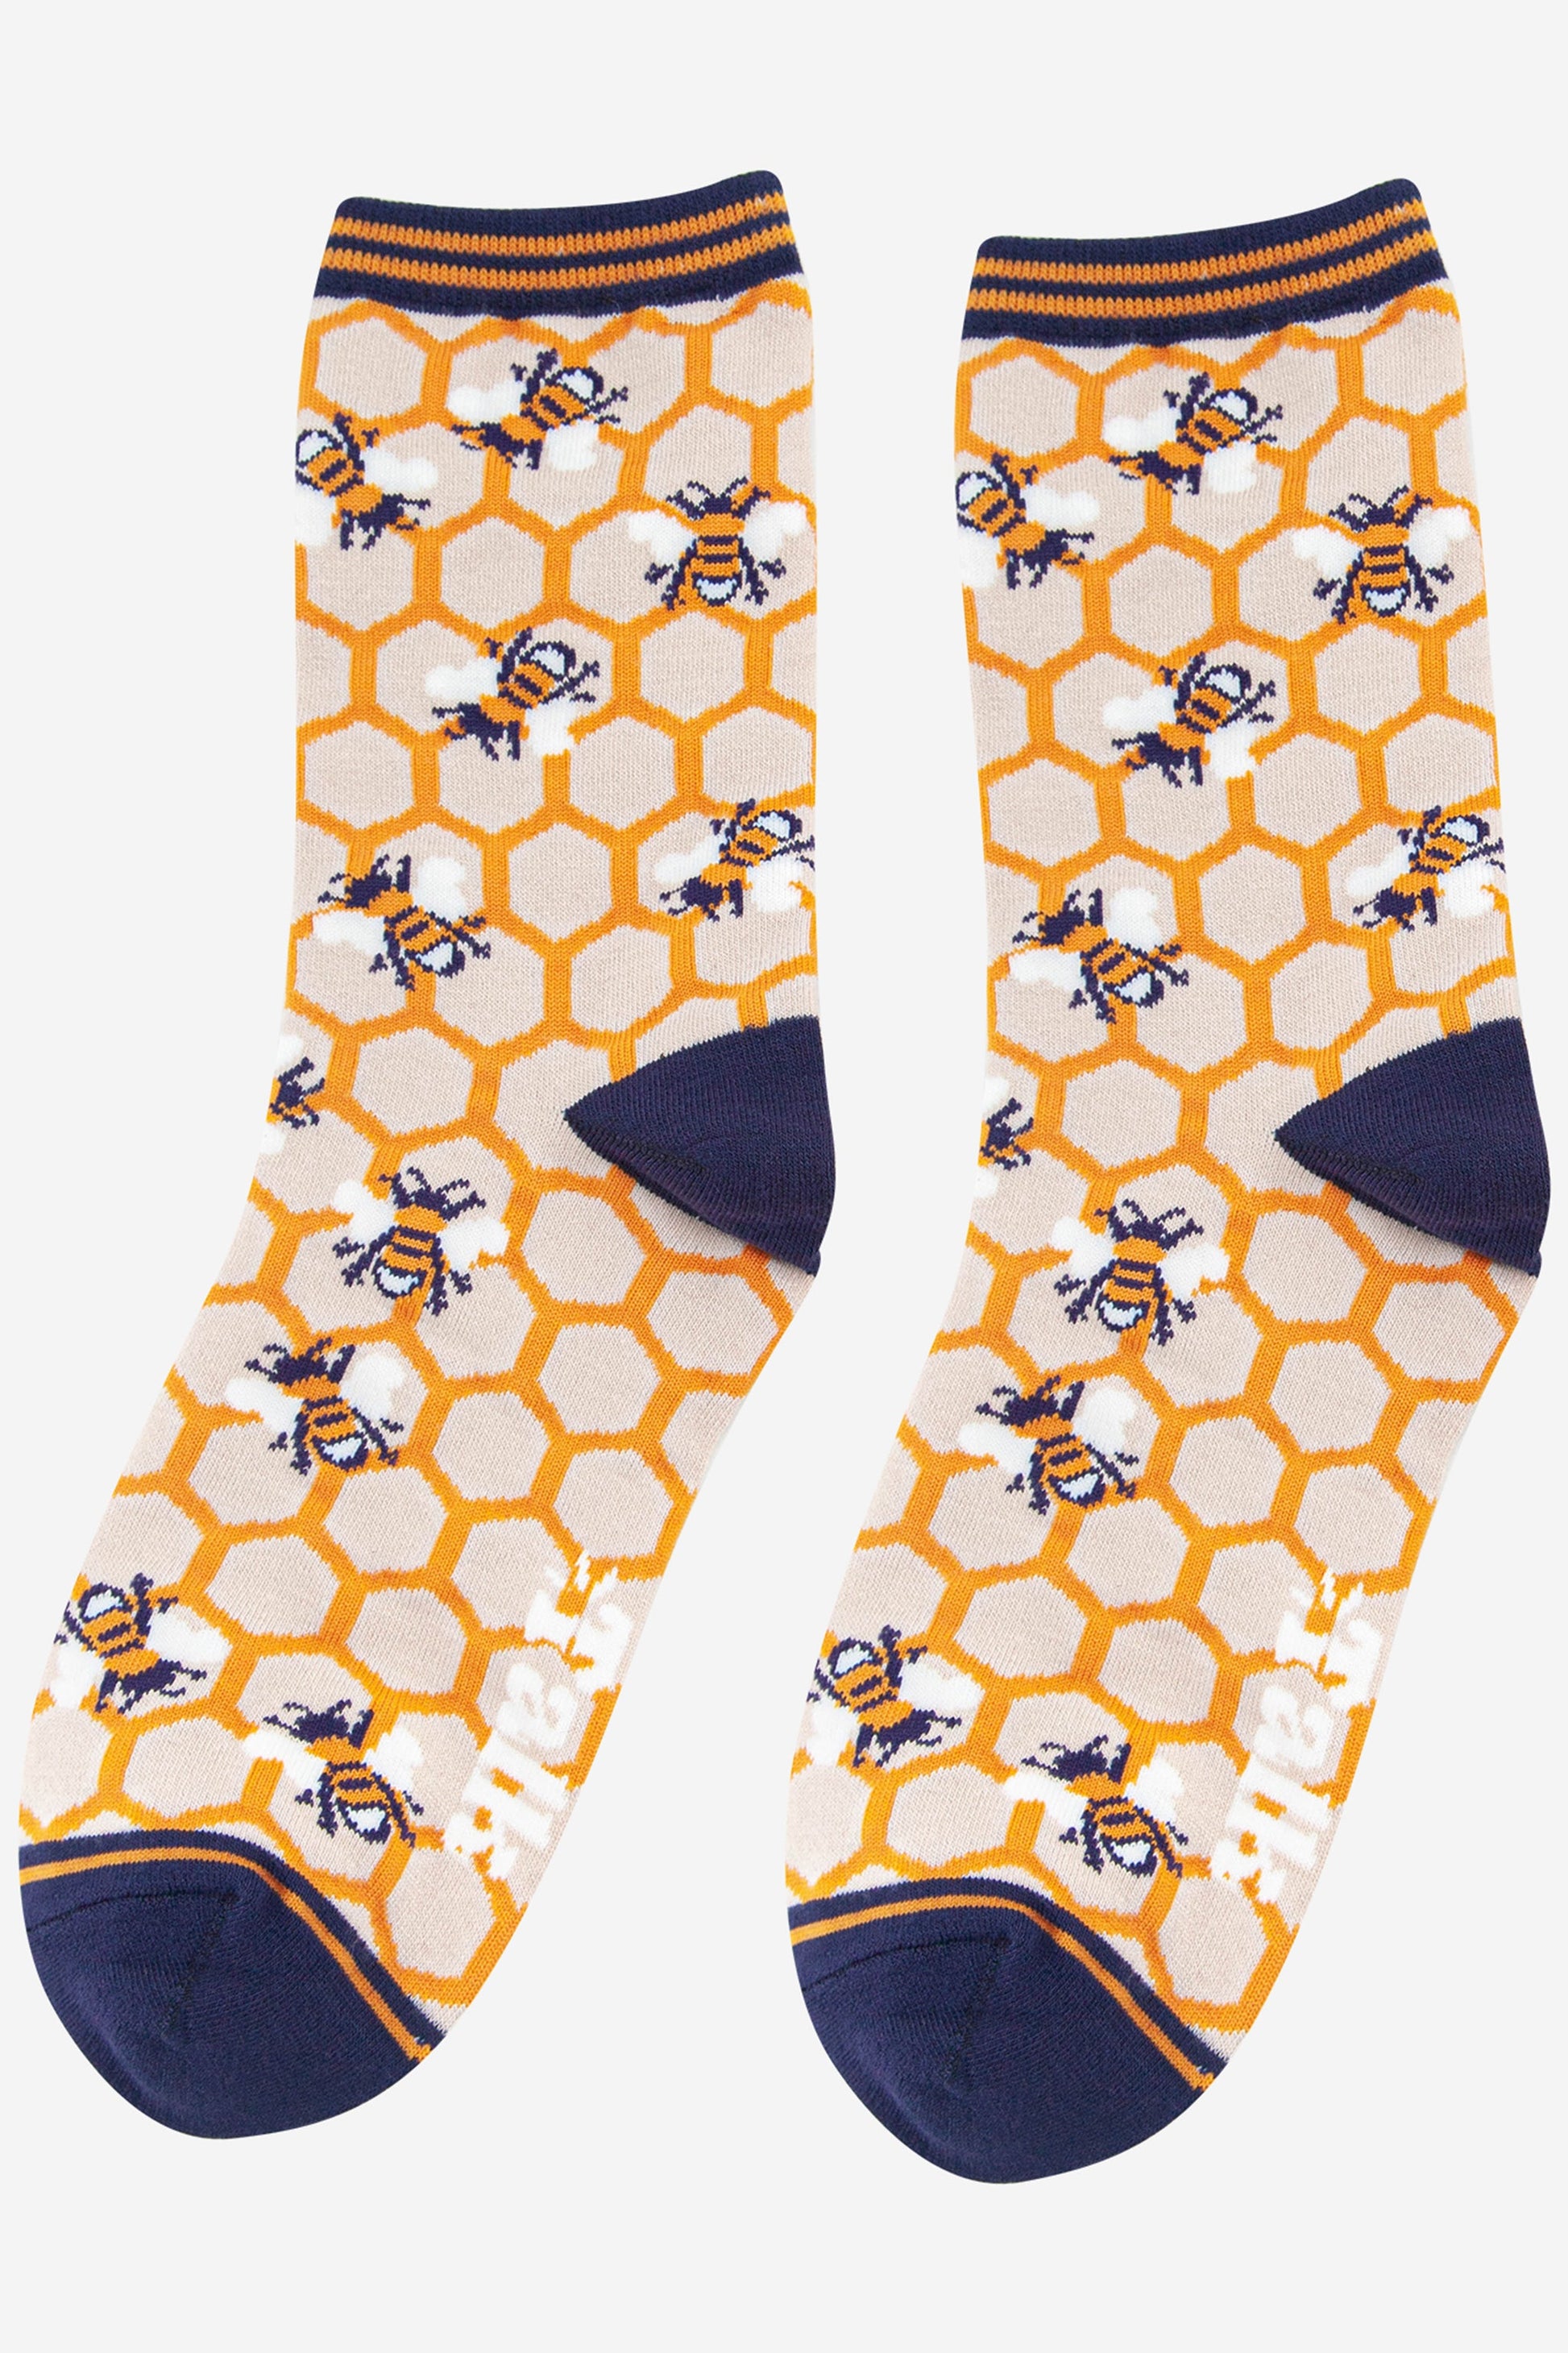 womens bees and honeycomb bamboo socks in yellow and navy blue with a striped cuff